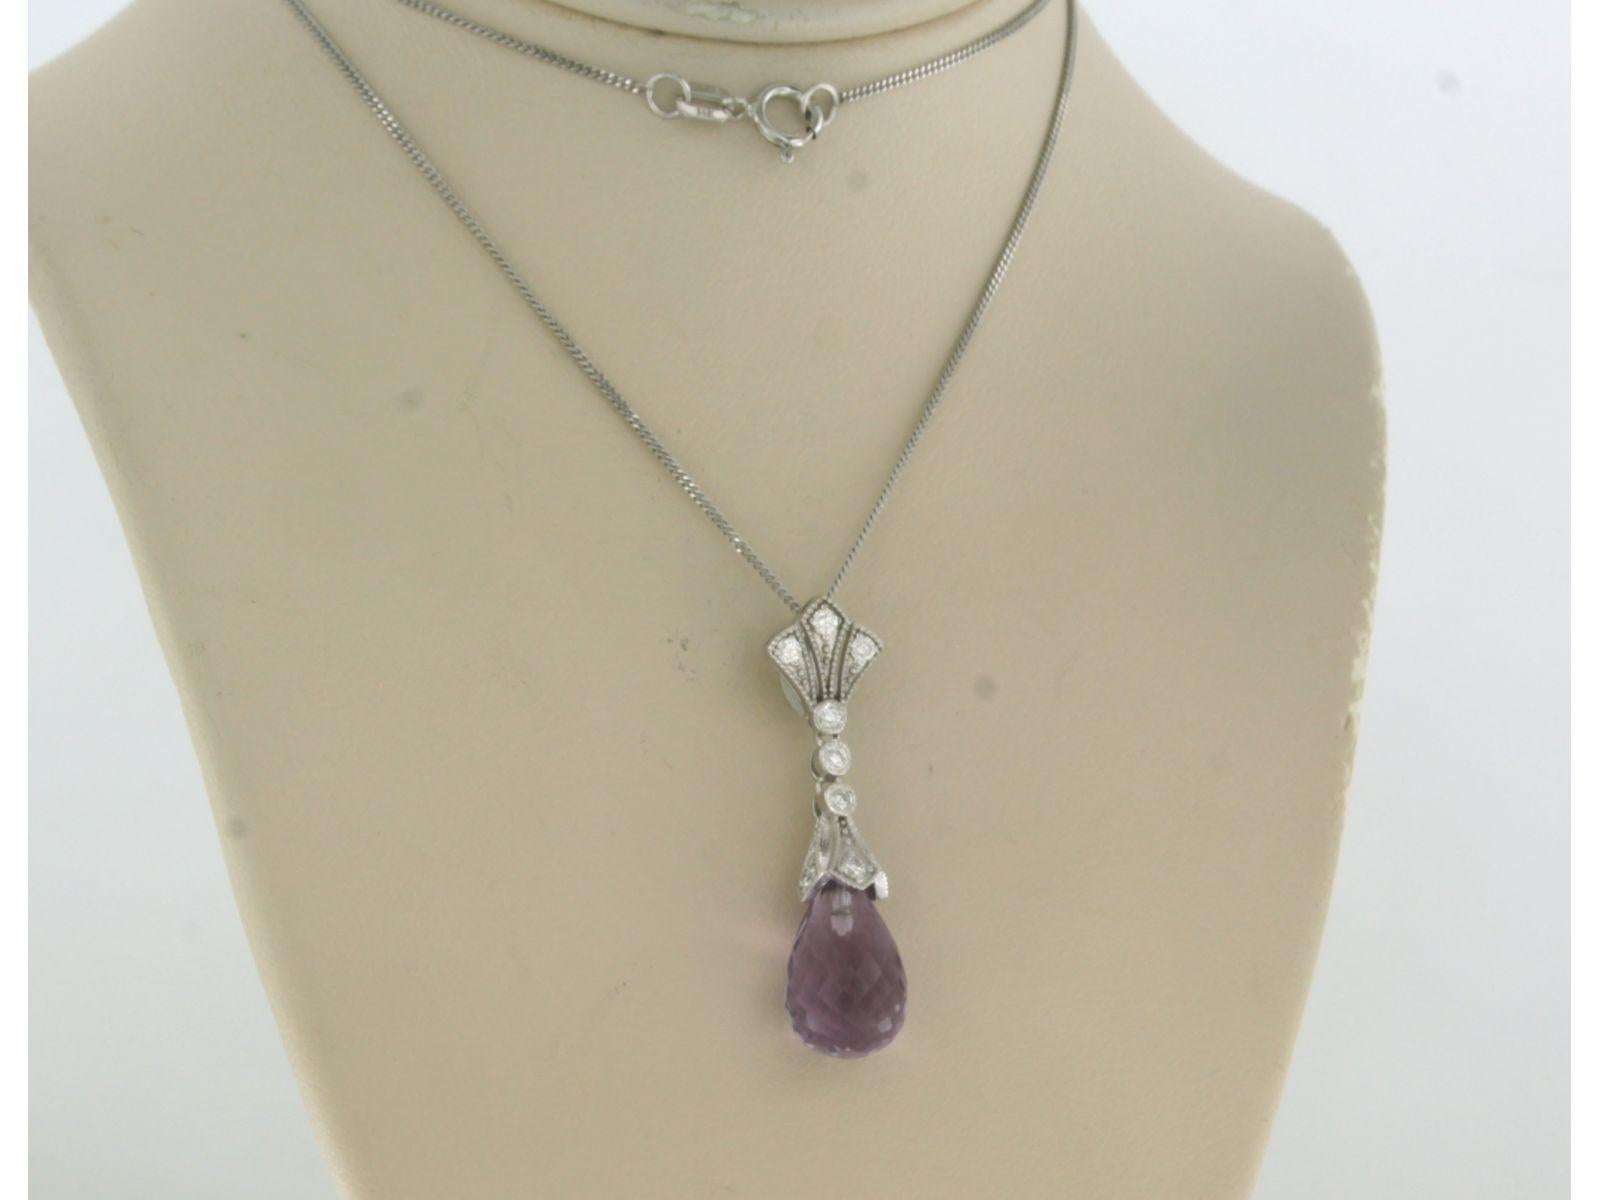 14k white gold necklace with pendant set with amethyst and brilliant cut diamonds. 0.18ct - F/G - VS/SI - 45 cm long

detailed description:

the length of the necklace is 45 cm long by 0.7 mm wide

Dimensions of the pendant are 3.0 cm long by 7.8 mm